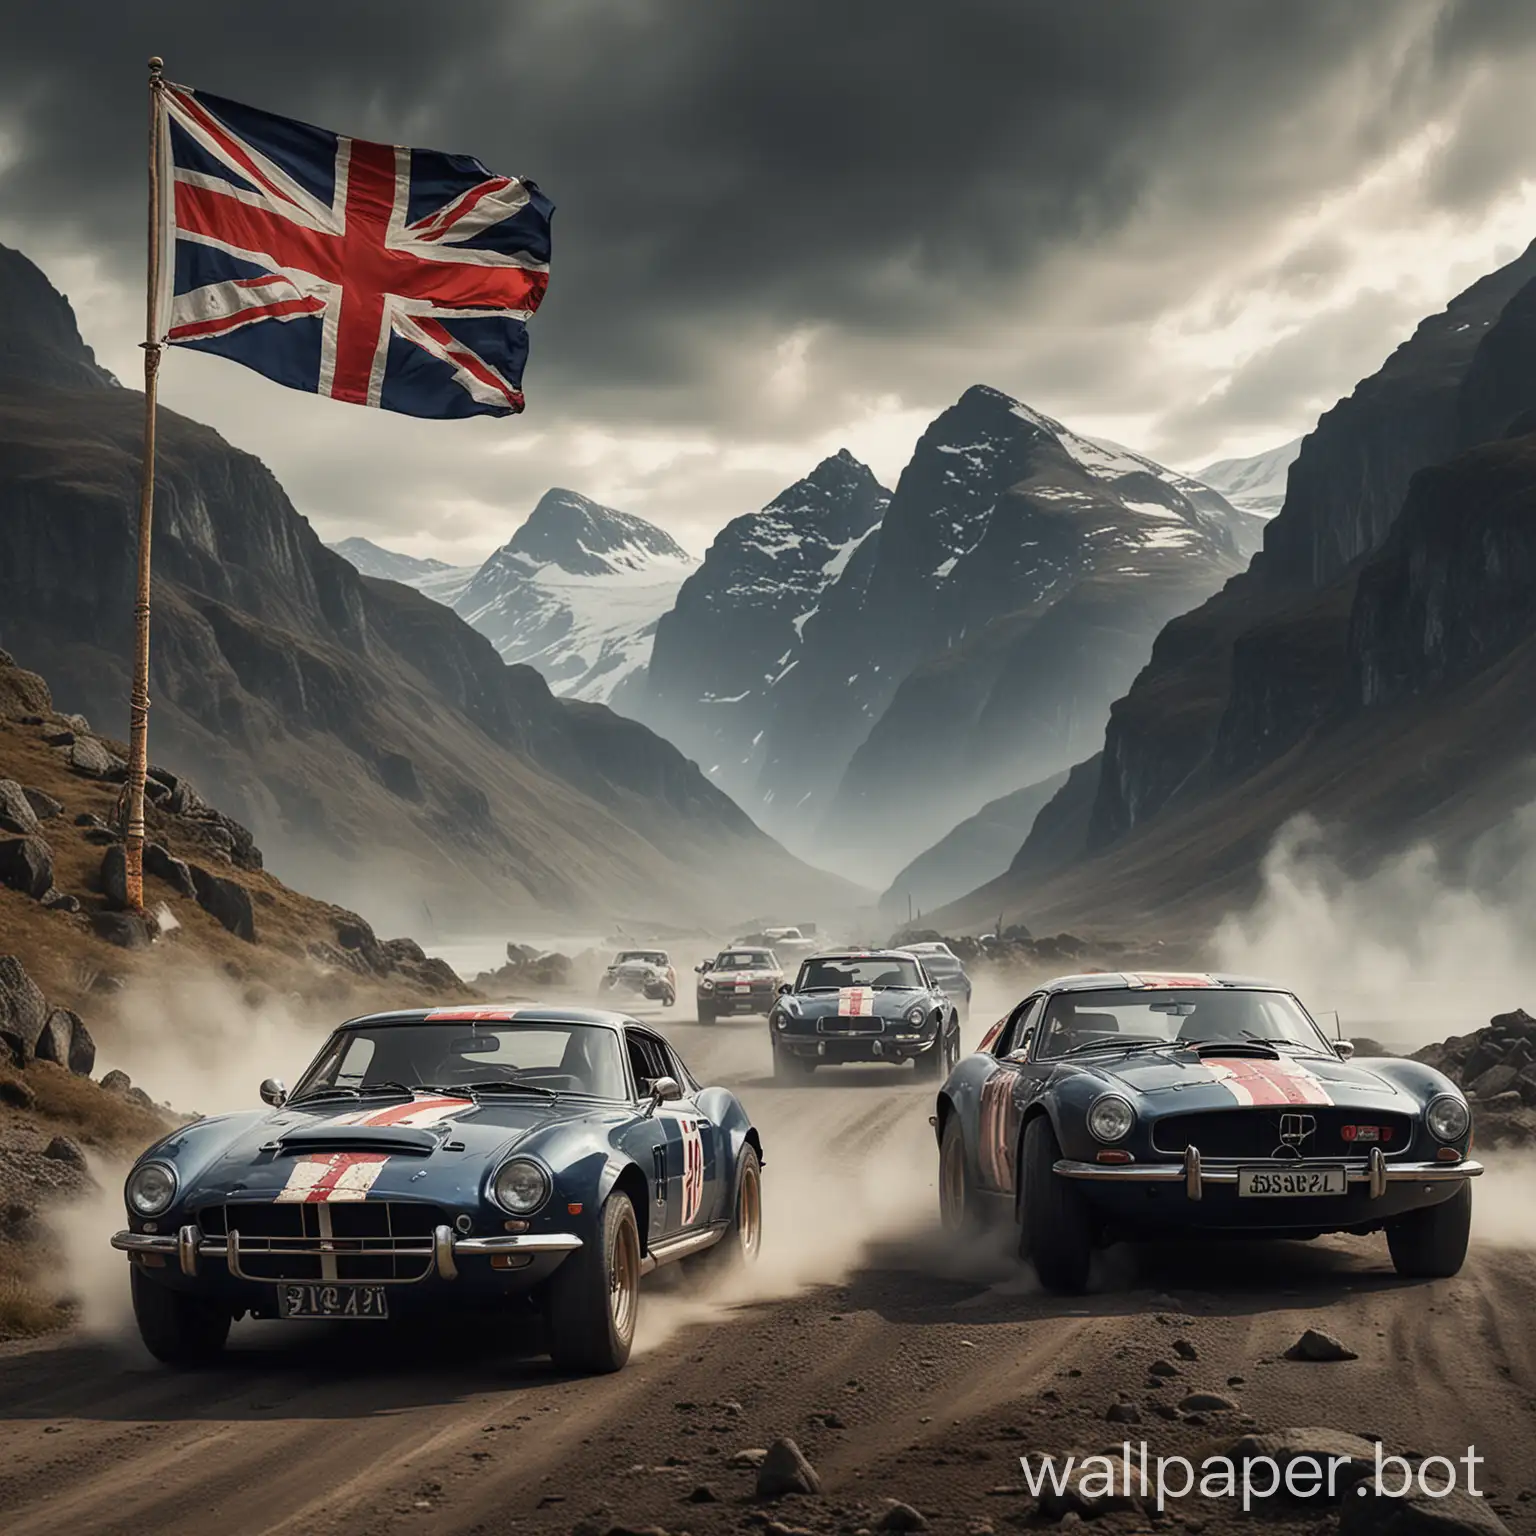 Nordic-Viking-Bodybuilders-and-Union-Jack-Drifting-Cars-in-Mountainous-Landscape